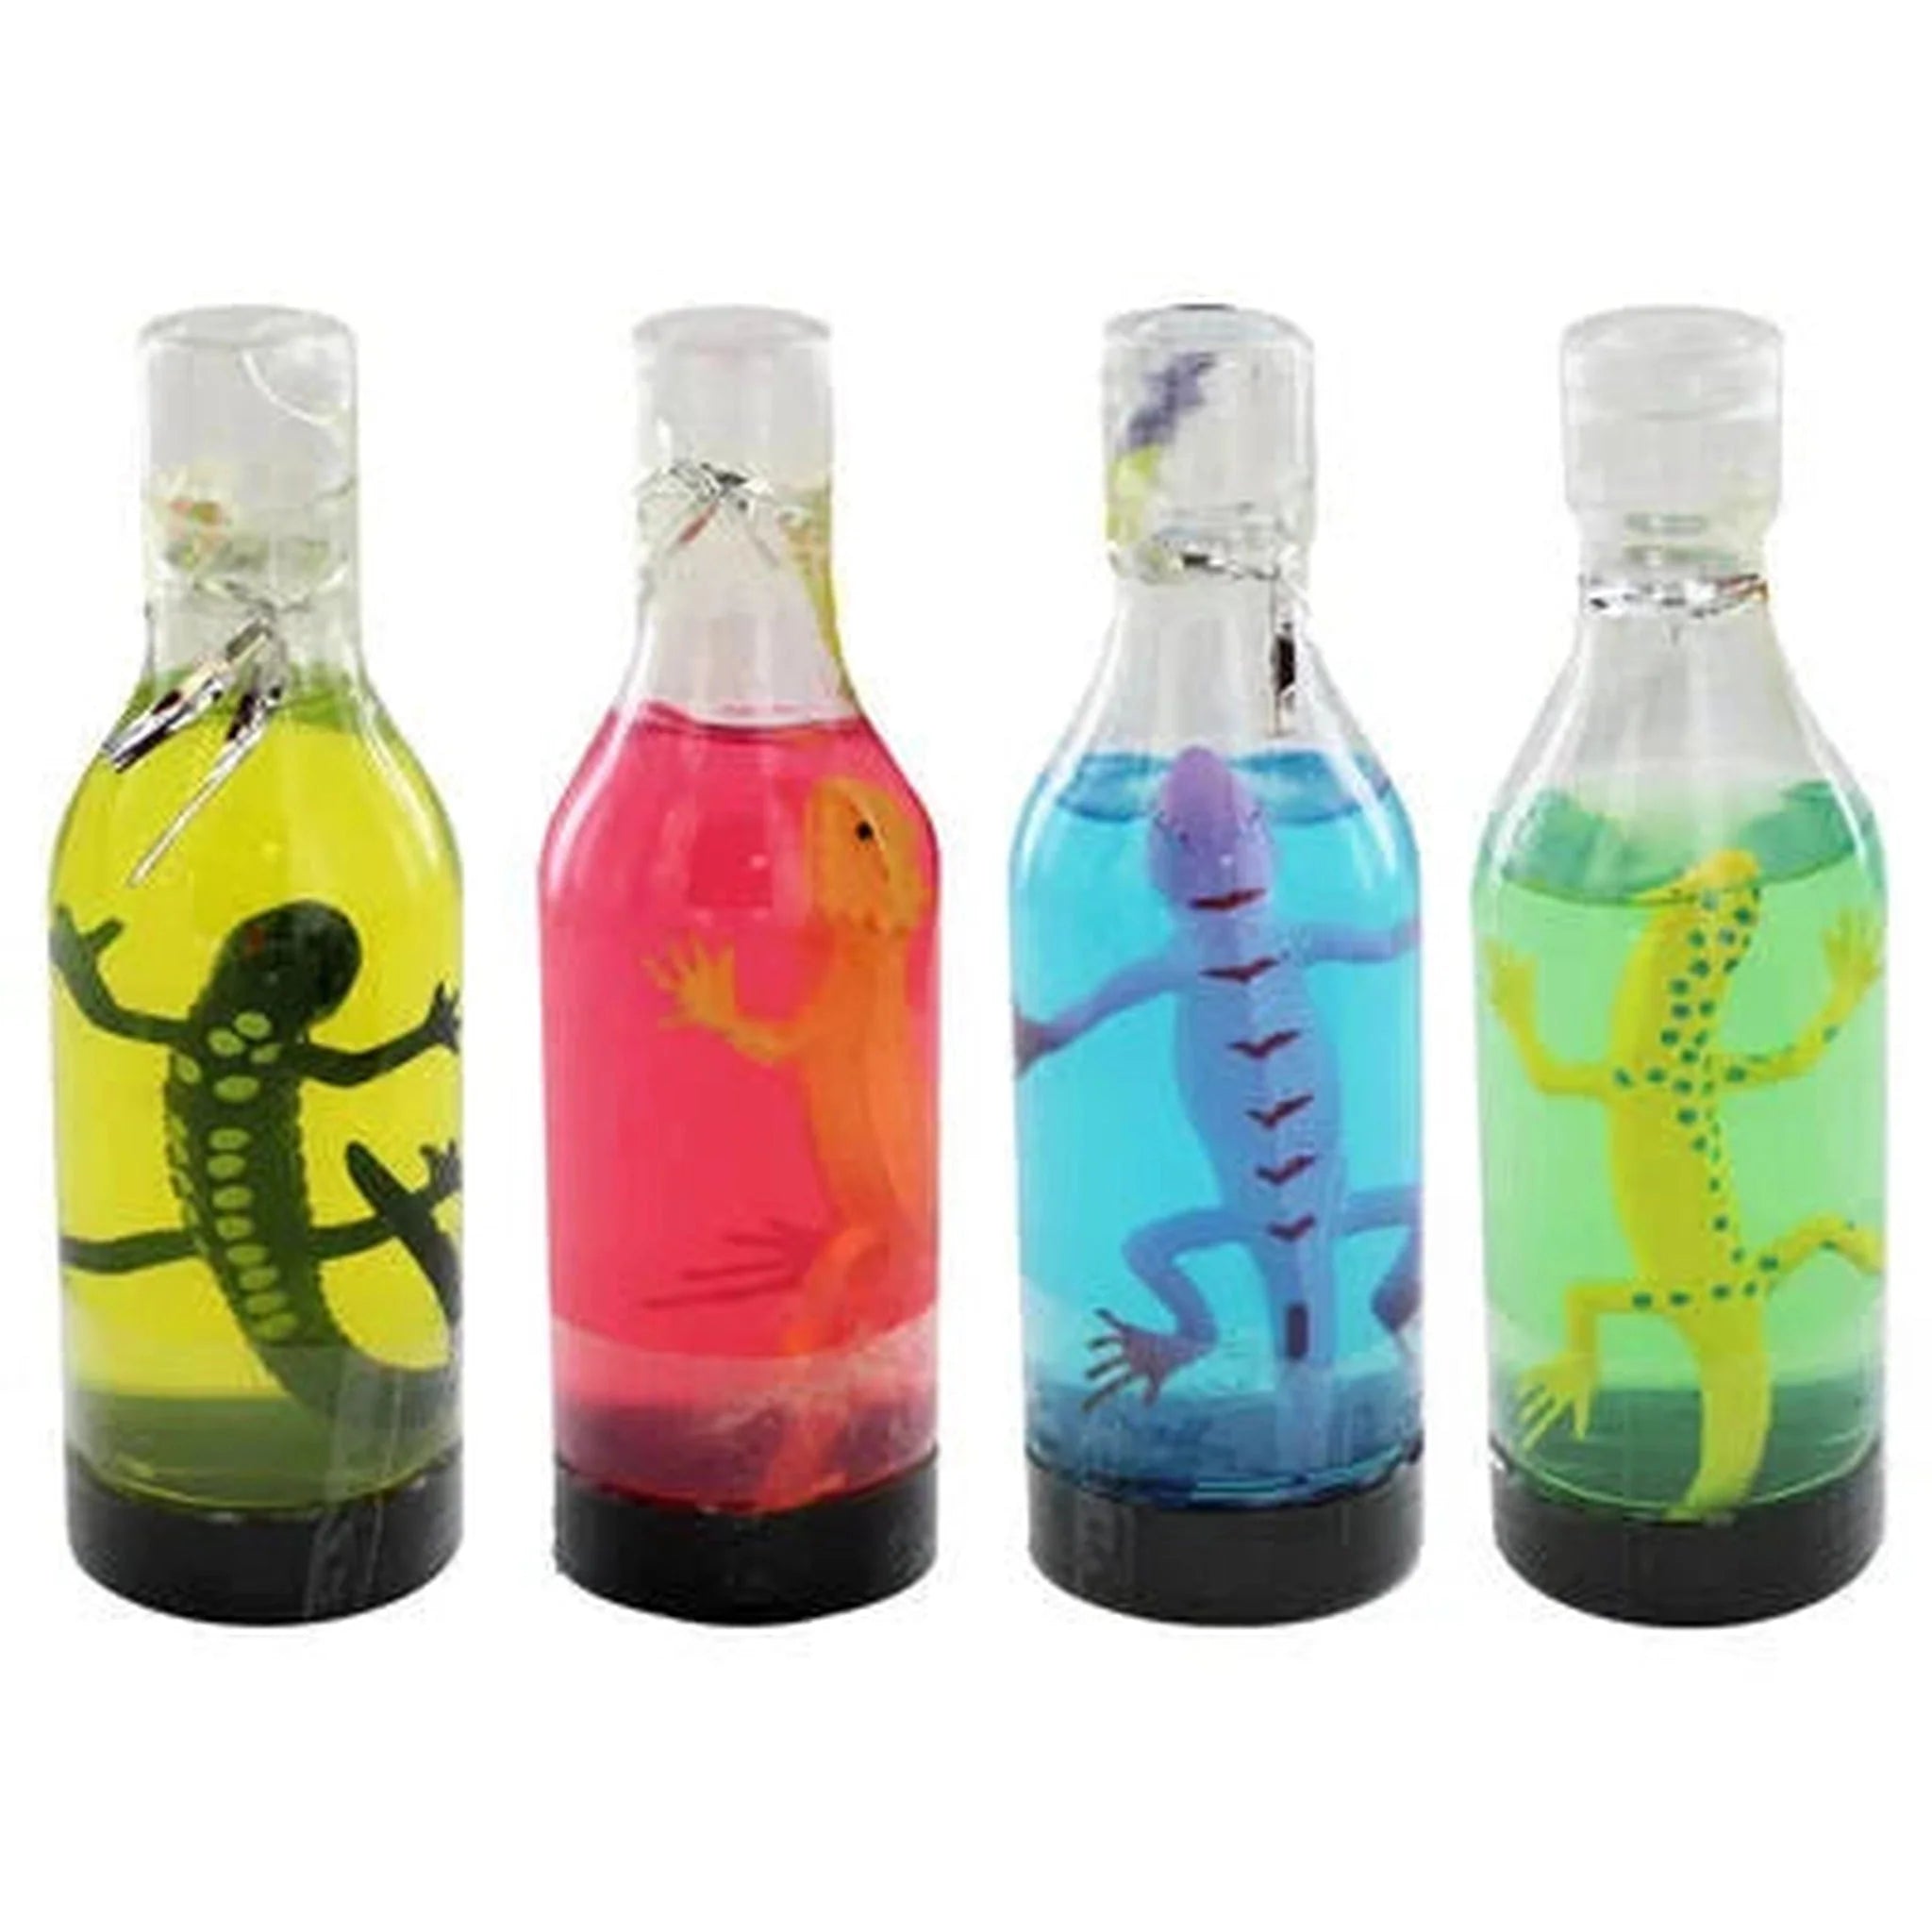 Lizard In A Bottle Of Slime - Kids Party Craft